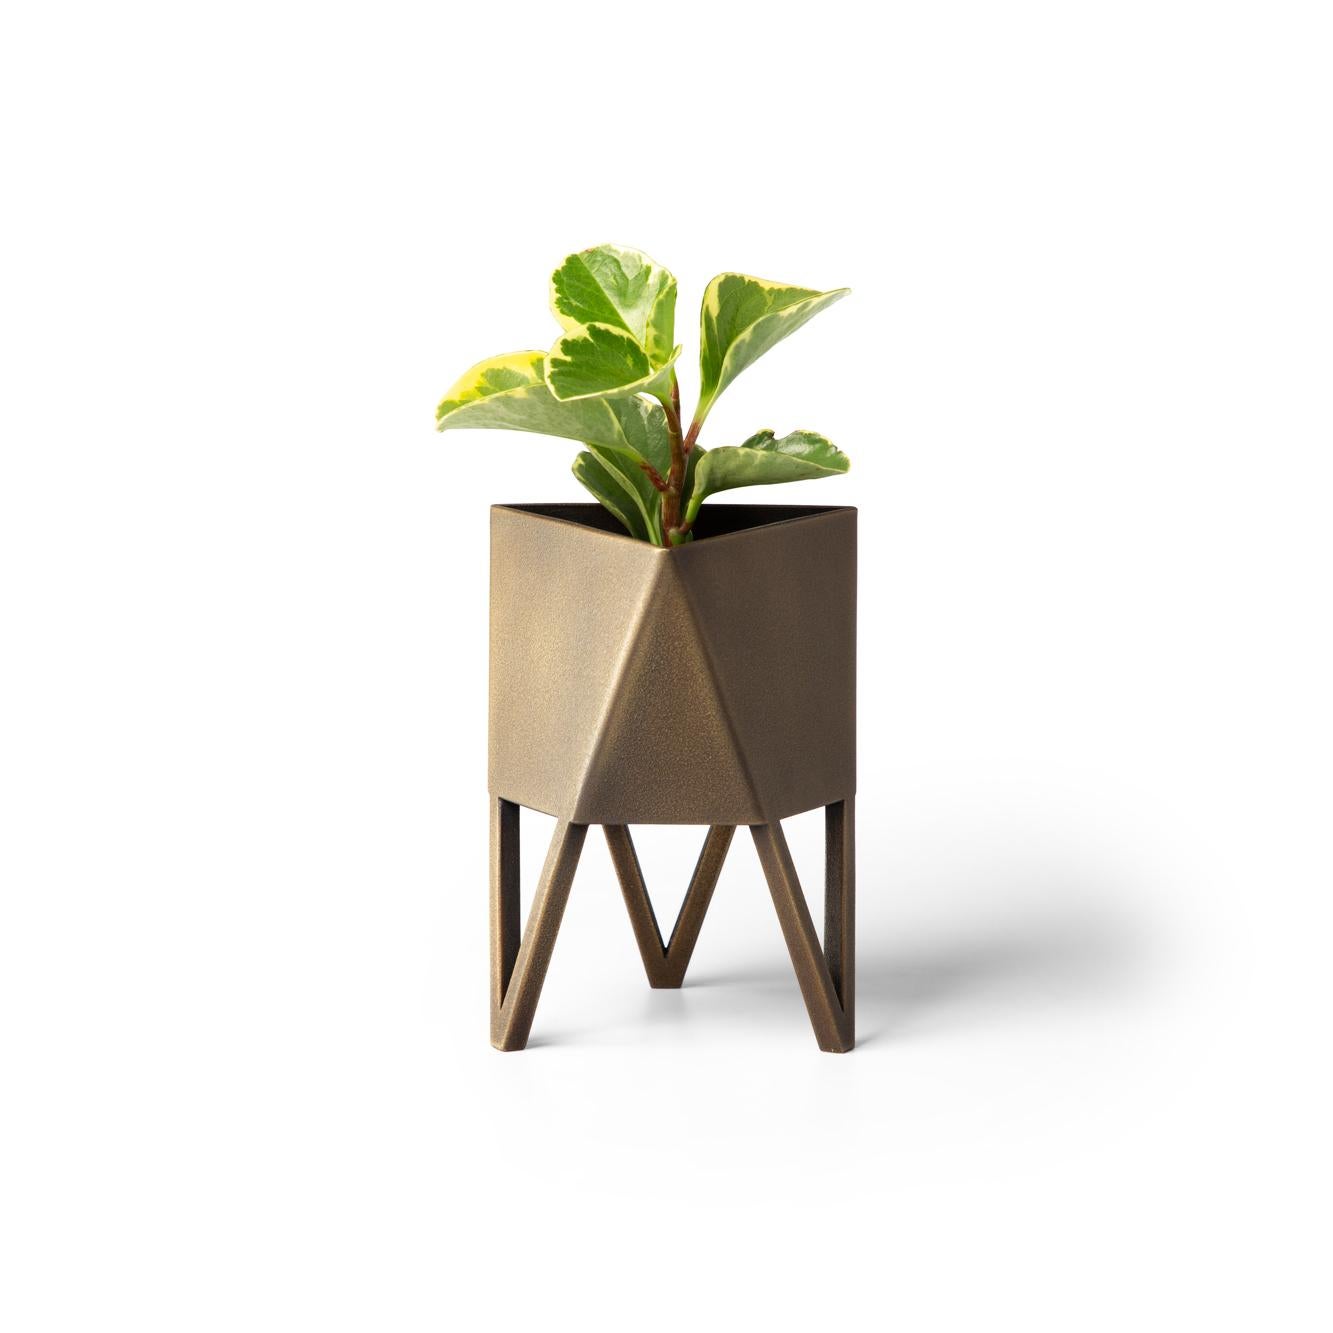 Faceted Mini Deca Planter, Yellow, Steel, Powder Coated, Indoor/Outdoor by Force/Collide